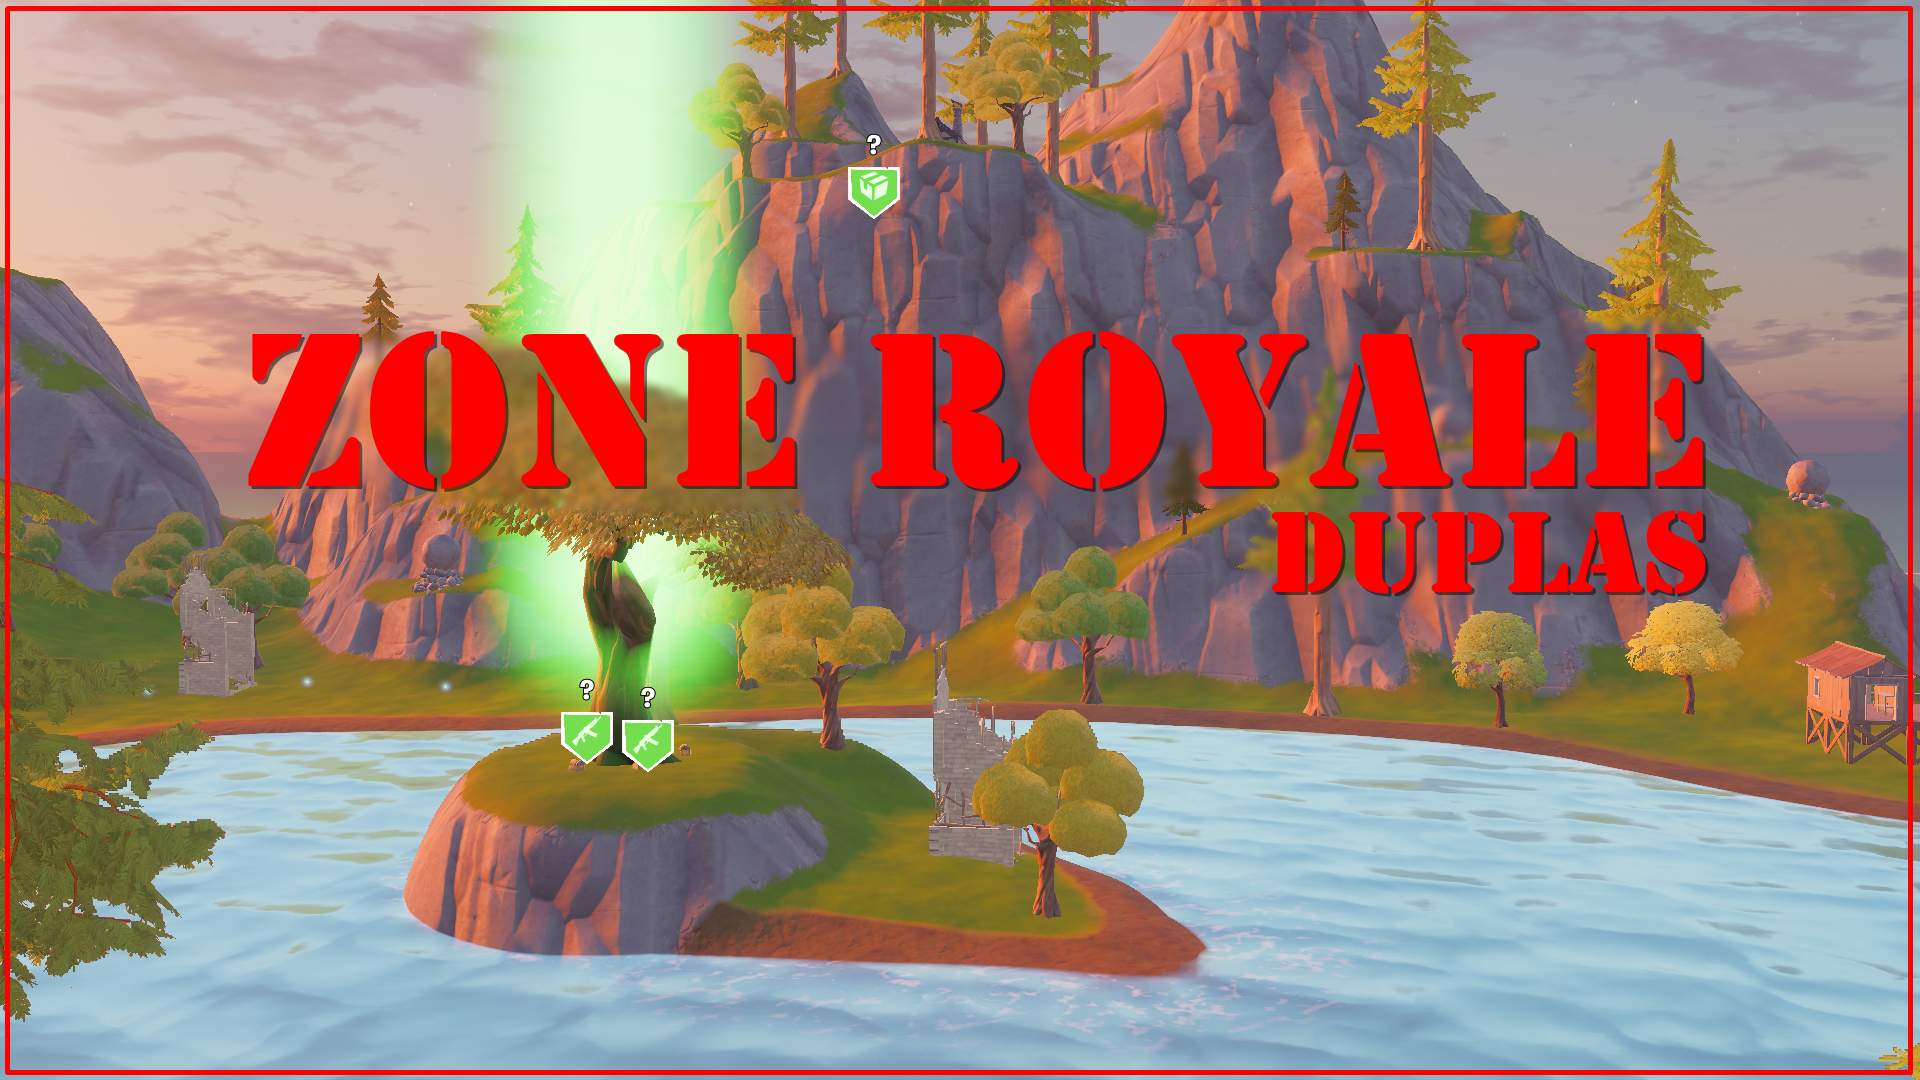 ZONE ROYALE - DUO